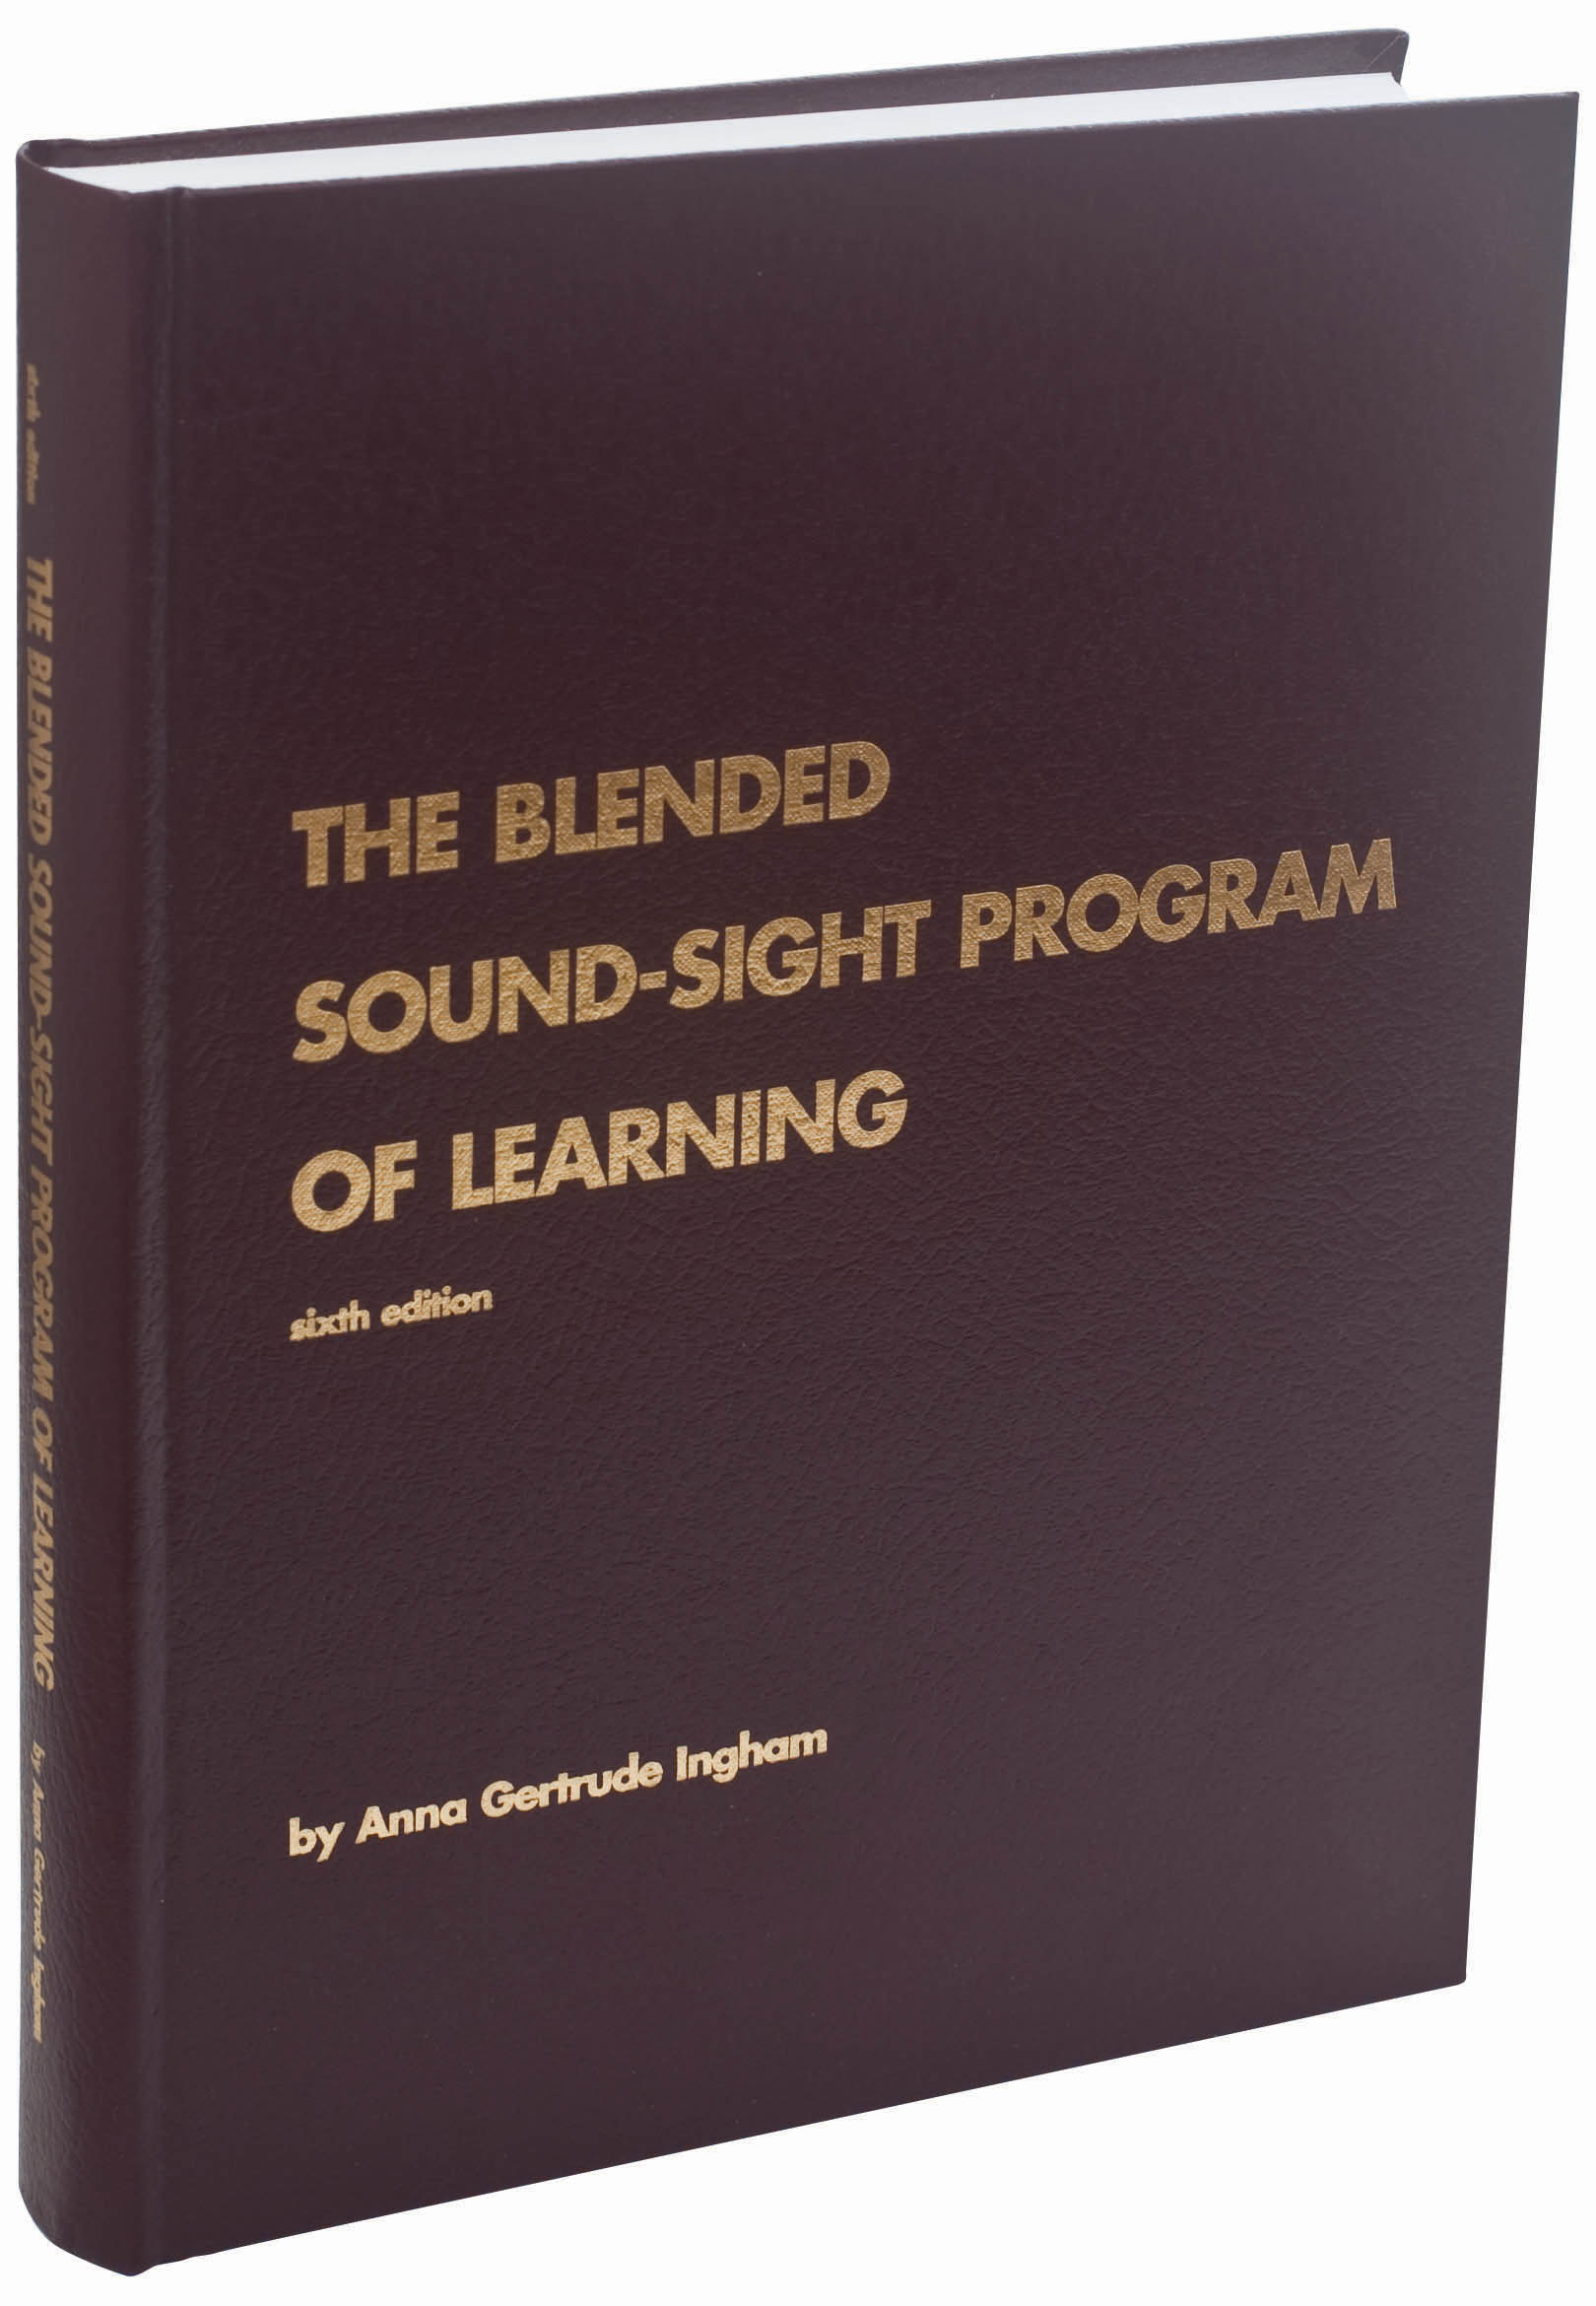 The Blended Sound-Sight Program of Learning